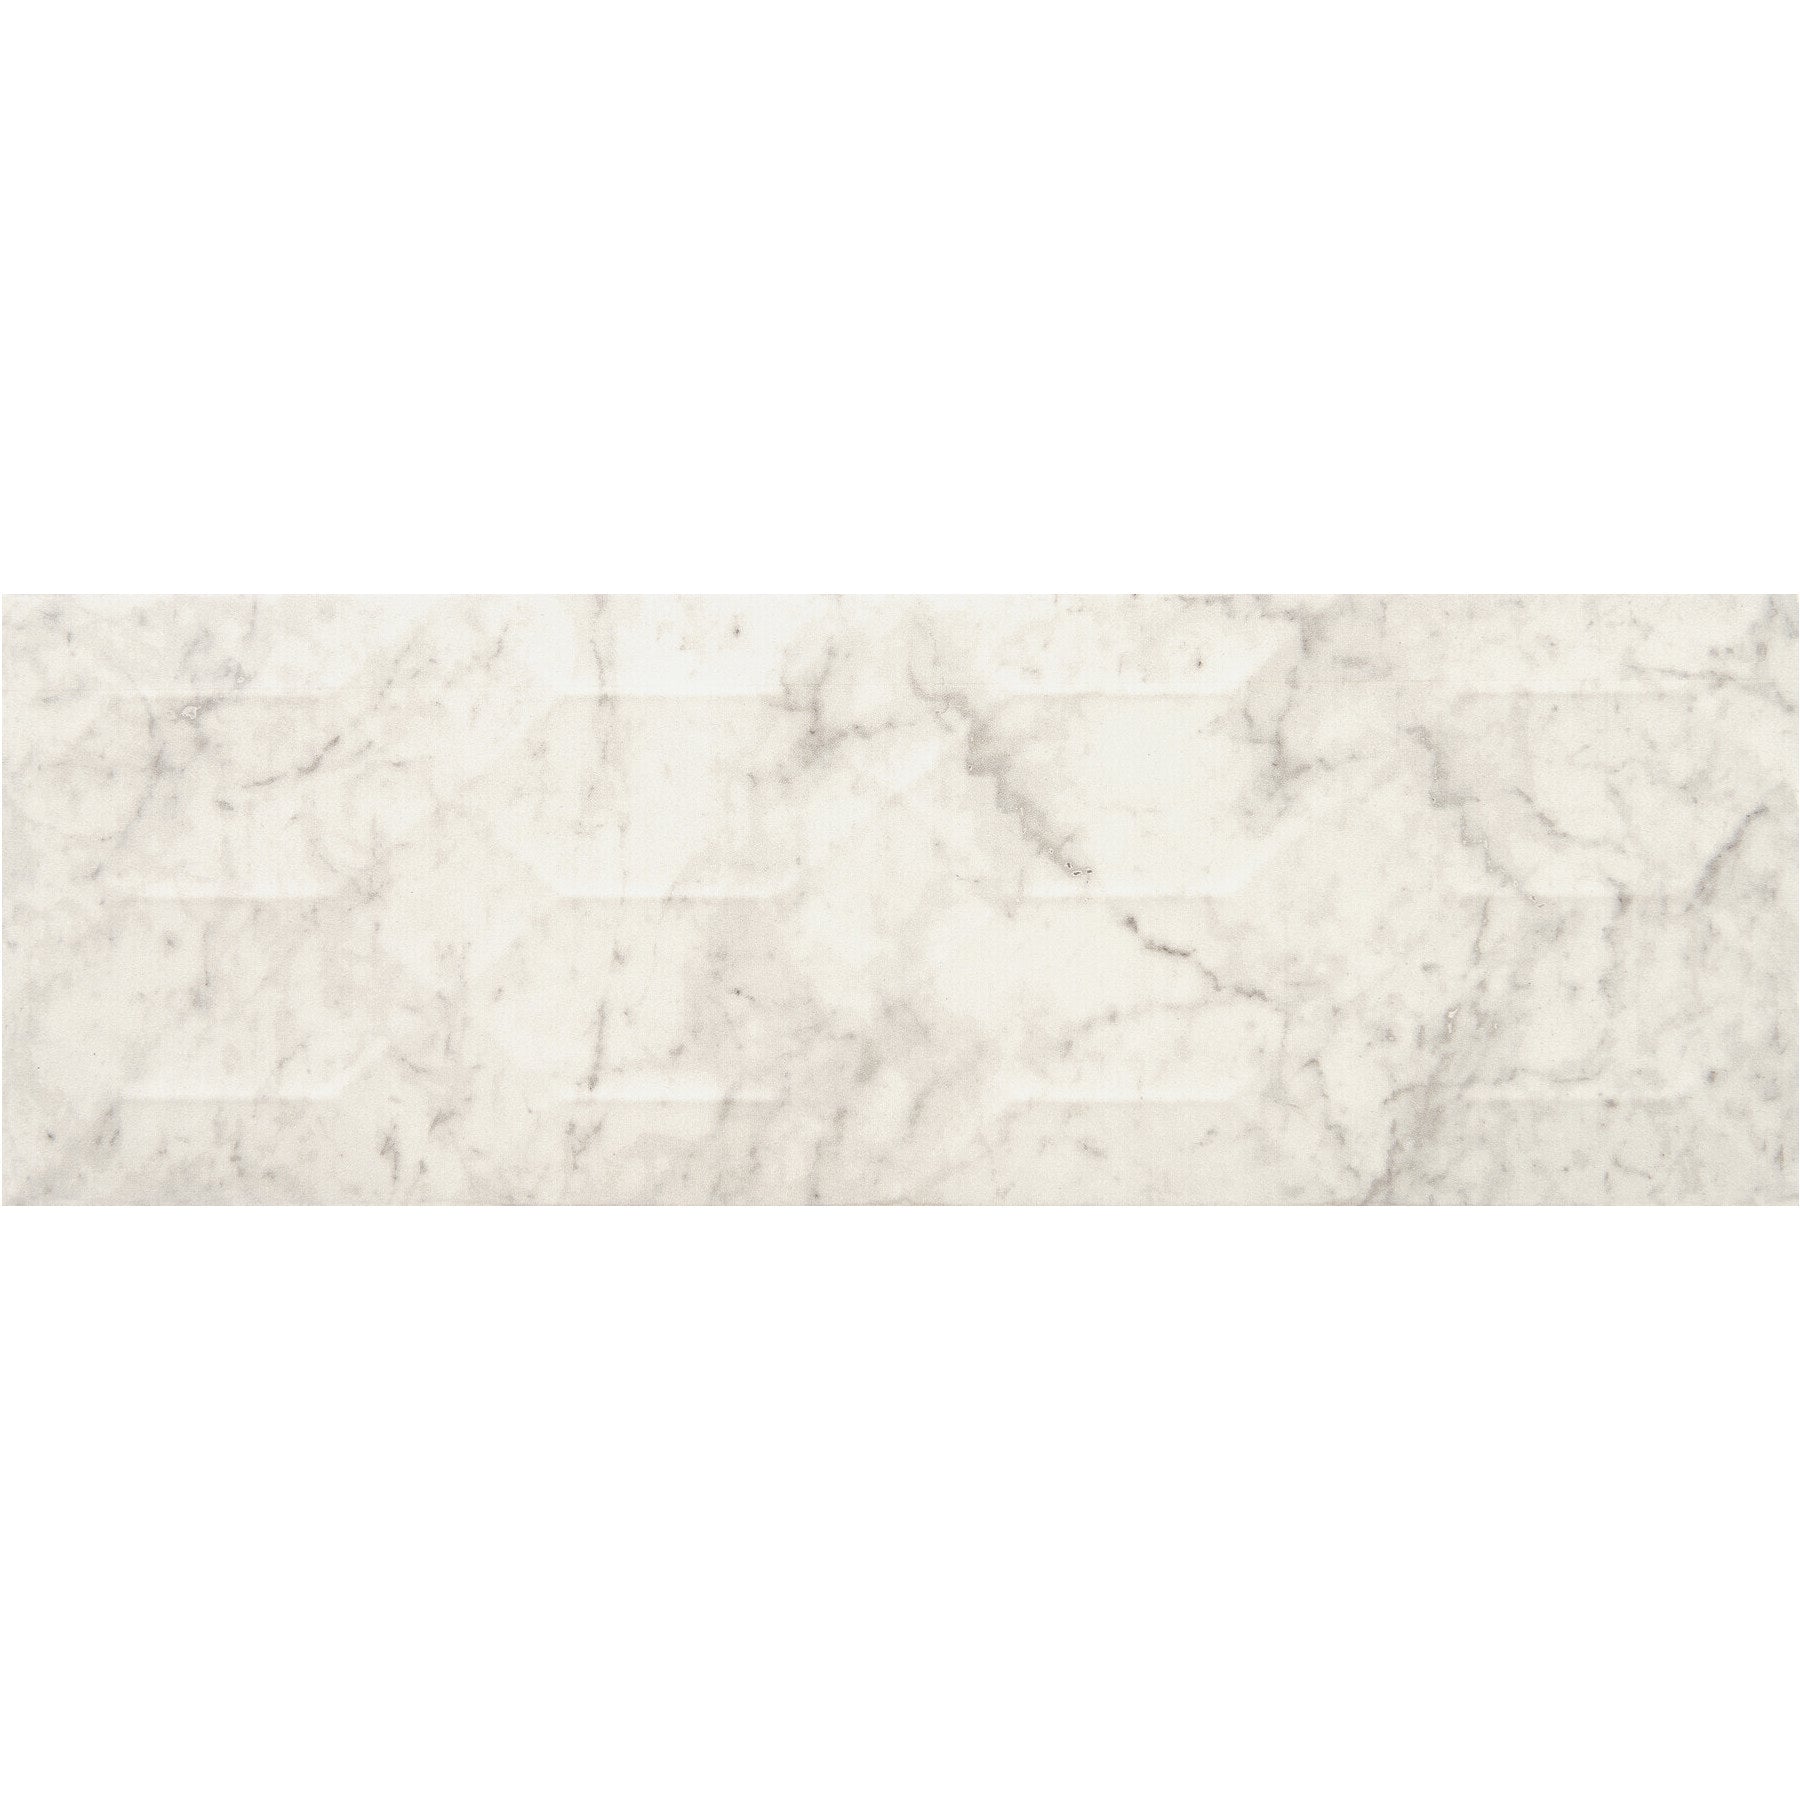 American Olean - Mythique Marble 8 in. x 24 in. Multi-Wave Wall Tile - Altissimo